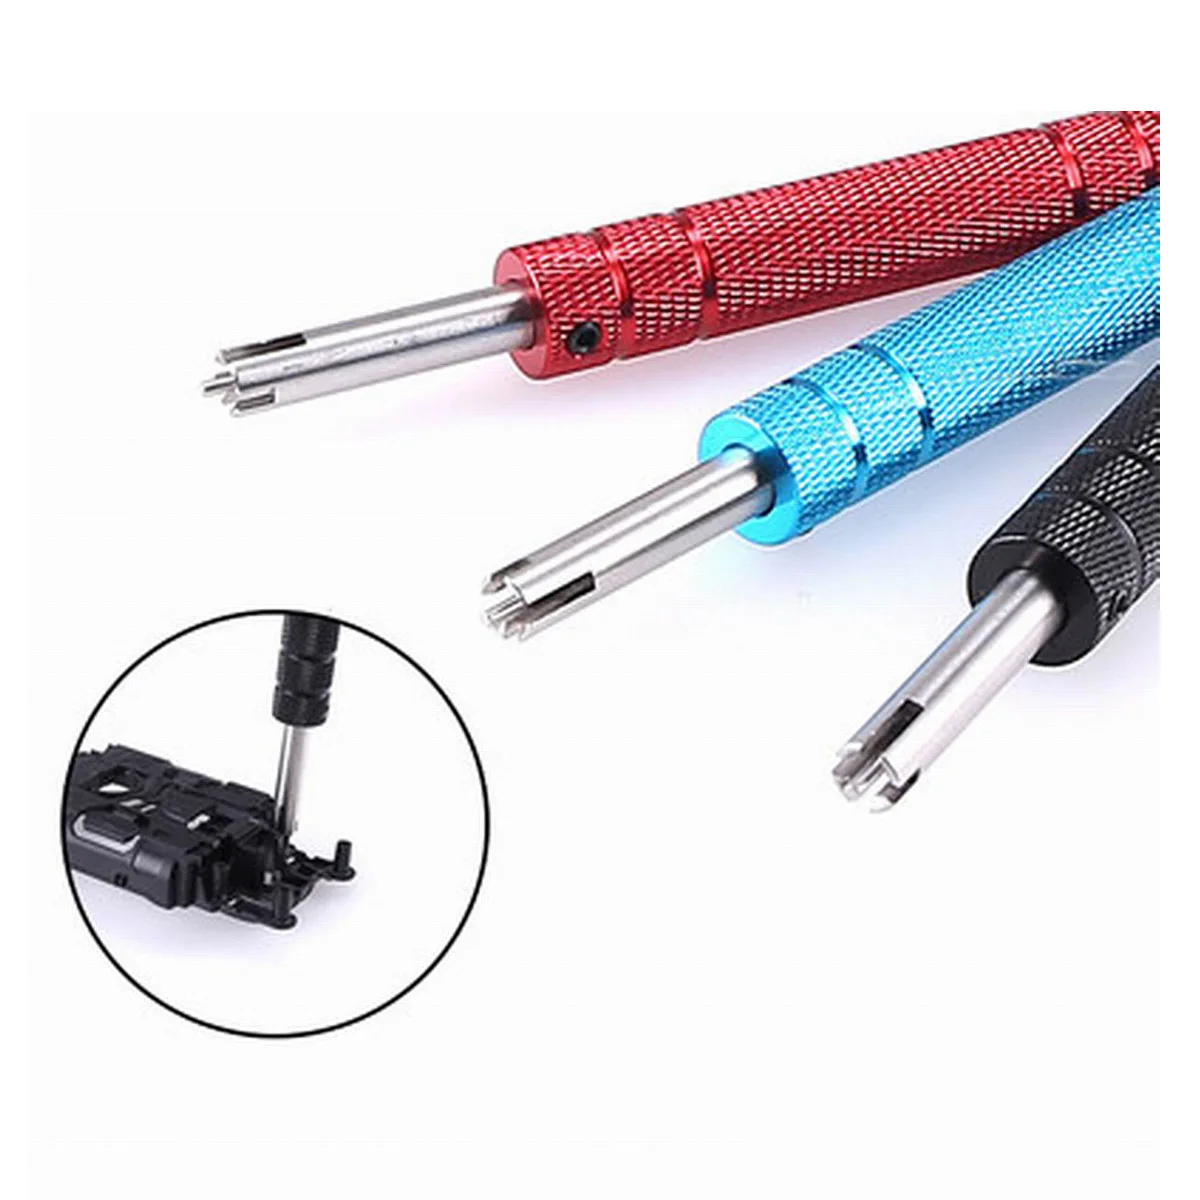 

MS/MSL Suspension Chassis Drill Tool Pillar Cut Tool Milling Cutter For MINI 4WD Tamiya Car Model Rc Tools